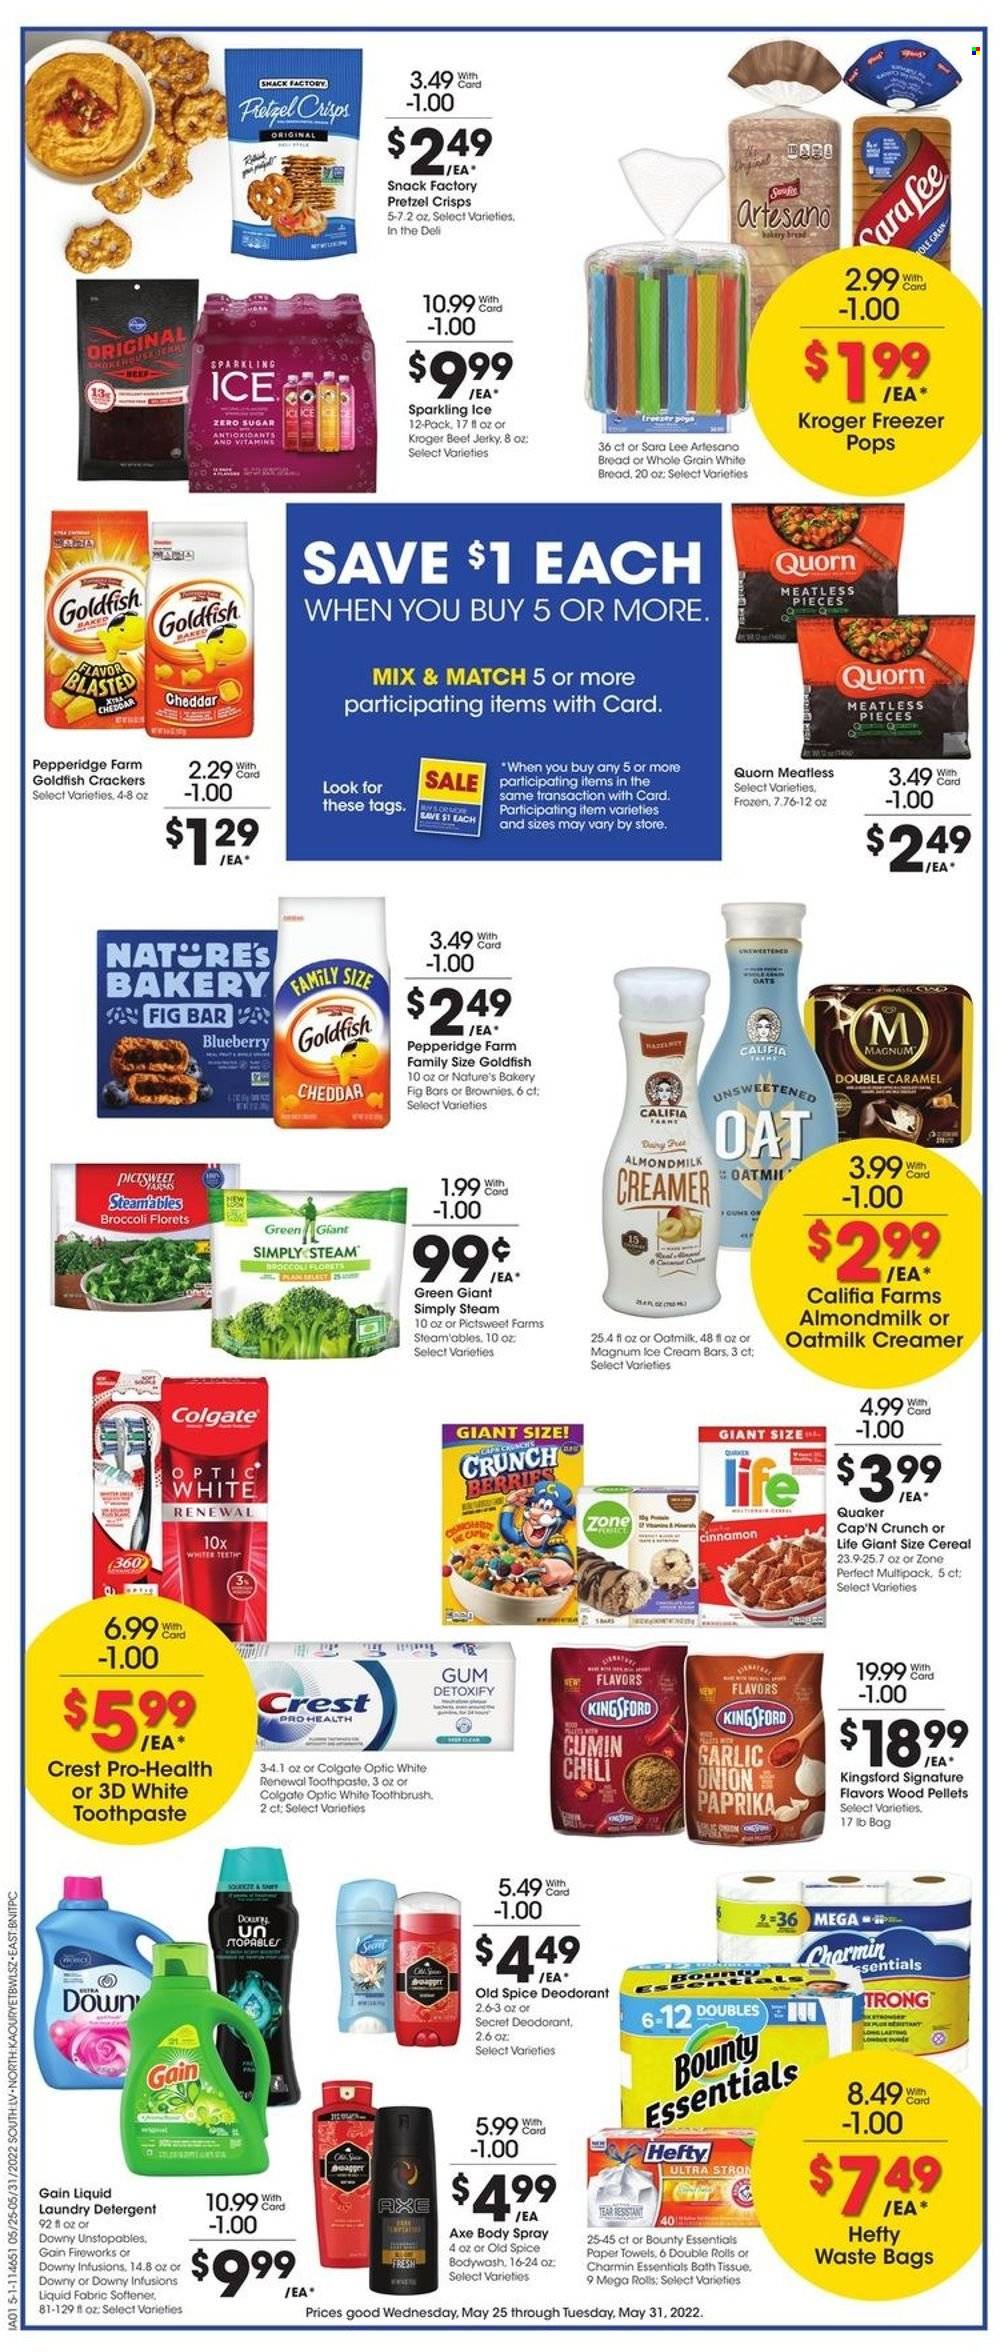 thumbnail - Fred Meyer Flyer - 05/25/2022 - 05/31/2022 - Sales products - Chanel, white bread, Sara Lee, broccoli, garlic, onion, Quaker, beef jerky, jerky, cheese, almond milk, oat milk, creamer, ice cream, ice cream bars, snack, Bounty, crackers, Goldfish, pretzel crisps, oats, cereals, Cap'n Crunch, Zone Perfect, spice, cumin, cinnamon, bath tissue, kitchen towels, paper towels, Charmin, detergent, Gain, Unstopables, fabric softener, laundry detergent, Gain Fireworks, Downy Laundry, Old Spice, Colgate, toothbrush, toothpaste, Crest, body spray, anti-perspirant, deodorant, Axe, Hefty, trash bags. Page 4.